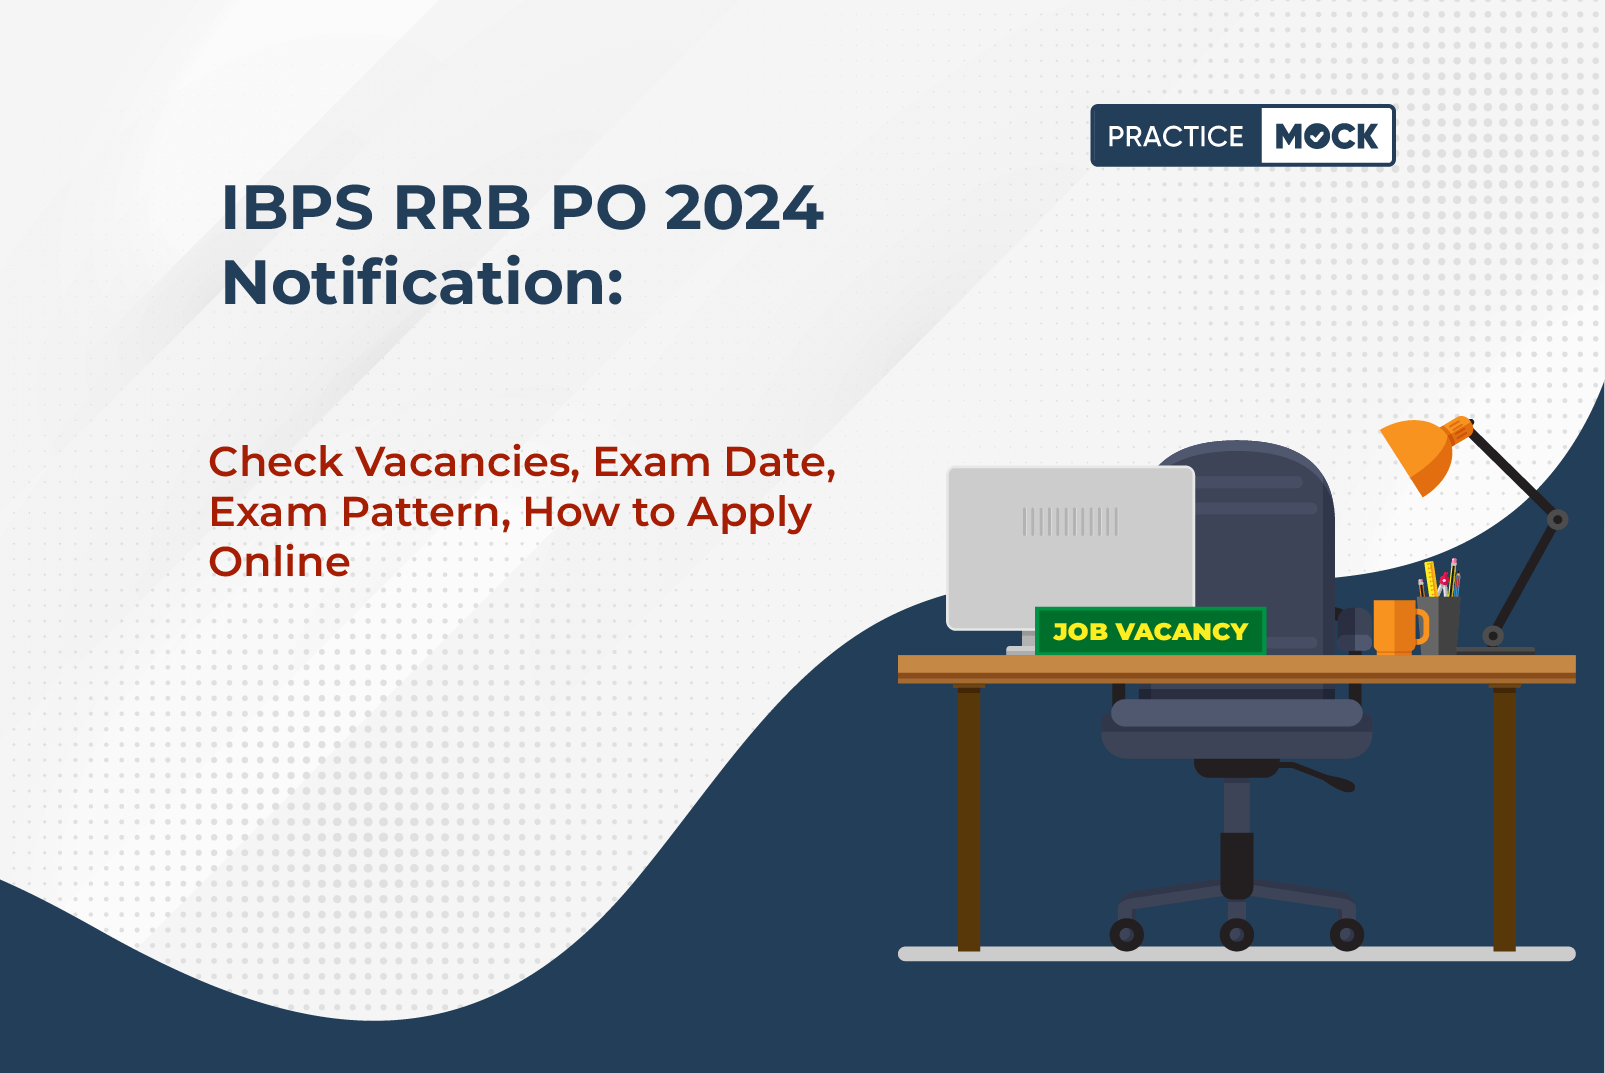 IBPS RRB PO 2024 Notification: Check Vacancies, Exam Date, Exam Pattern, How to Apply Online